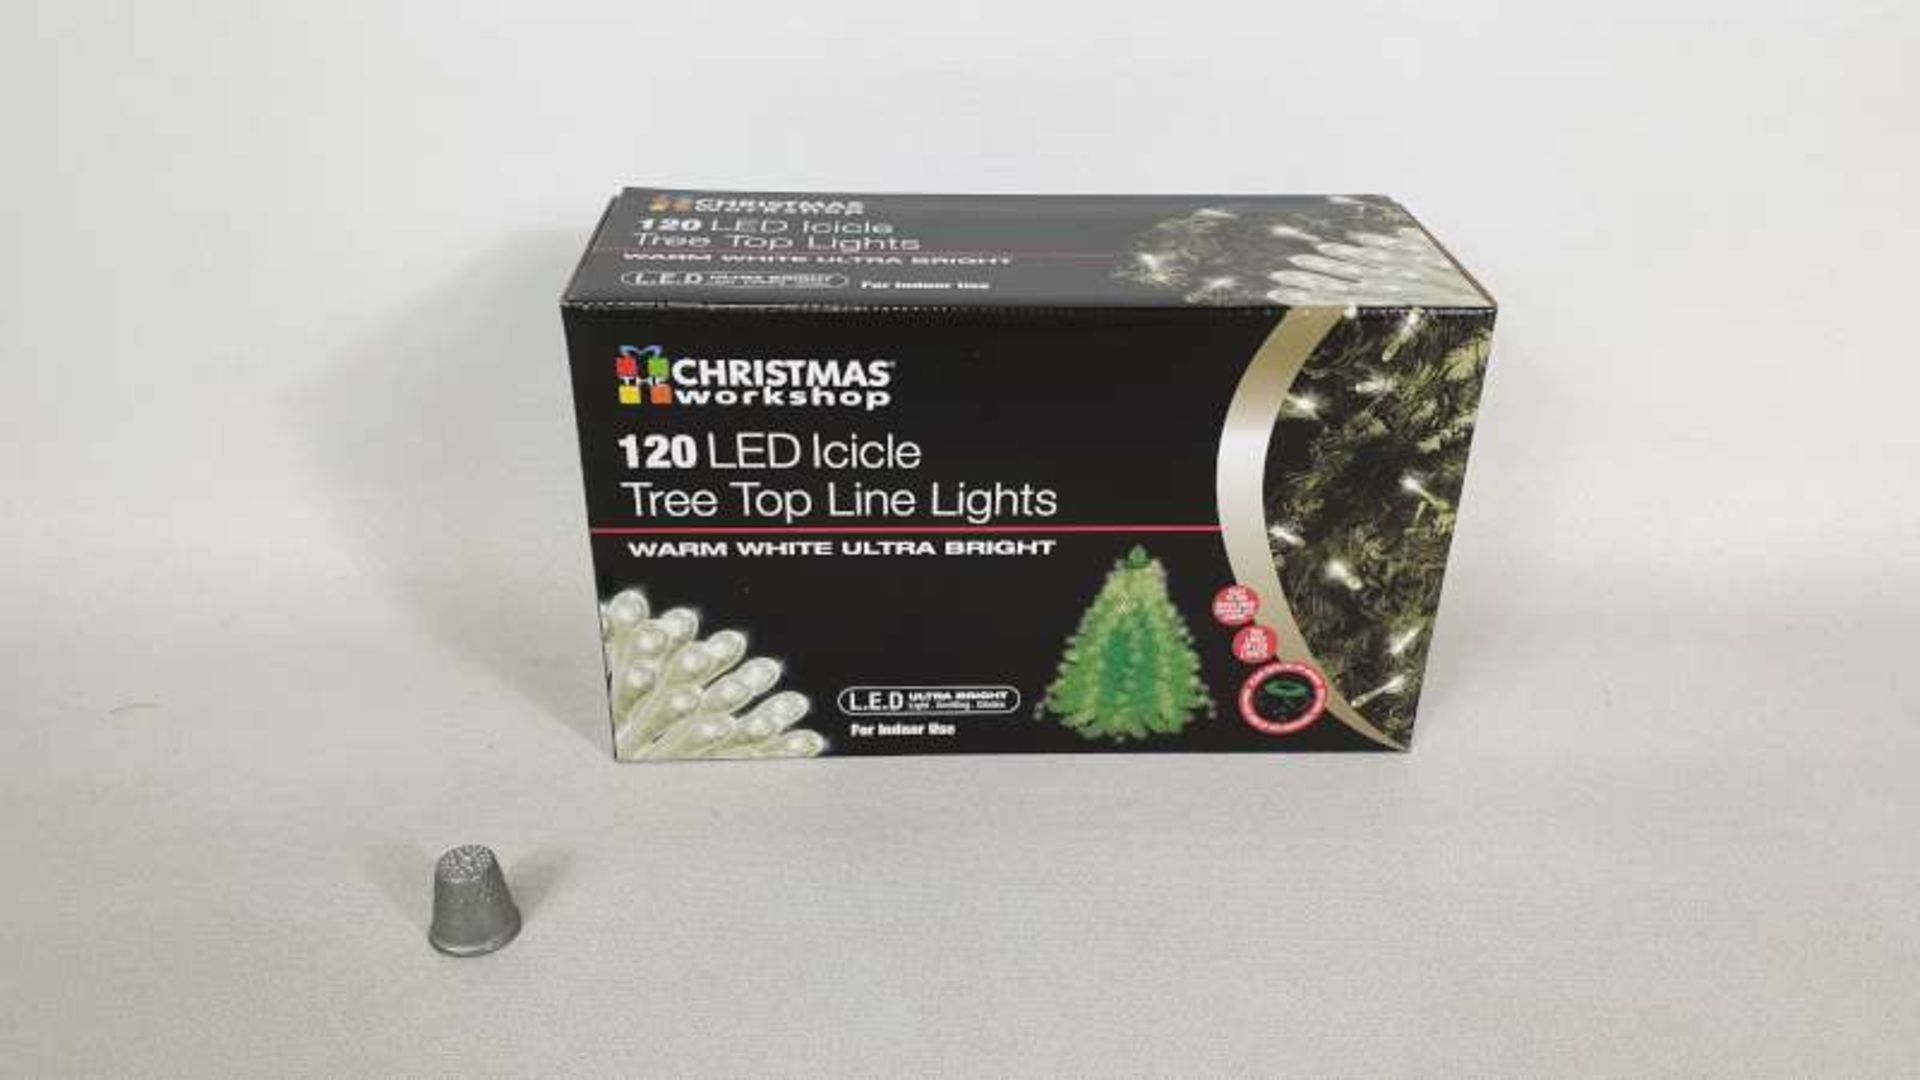 24 X 120 X LED ICICLE WARM WHITE ULTRA BRIGHT COLOURED TREE TOP LINE LIGHTS IN 2 BOXES